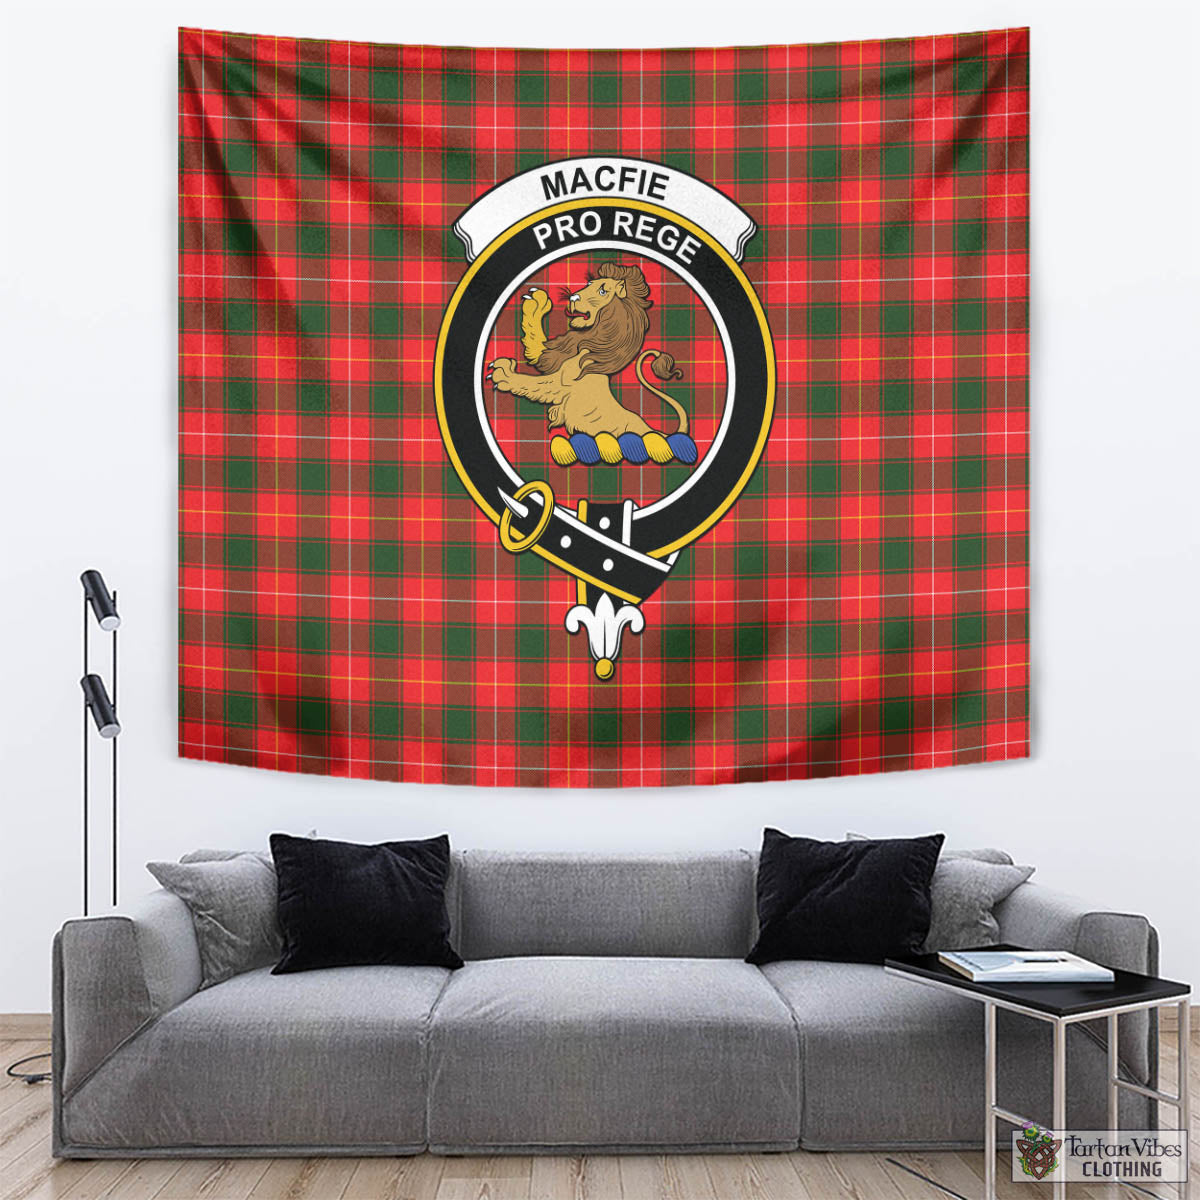 Tartan Vibes Clothing MacFie Modern Tartan Tapestry Wall Hanging and Home Decor for Room with Family Crest